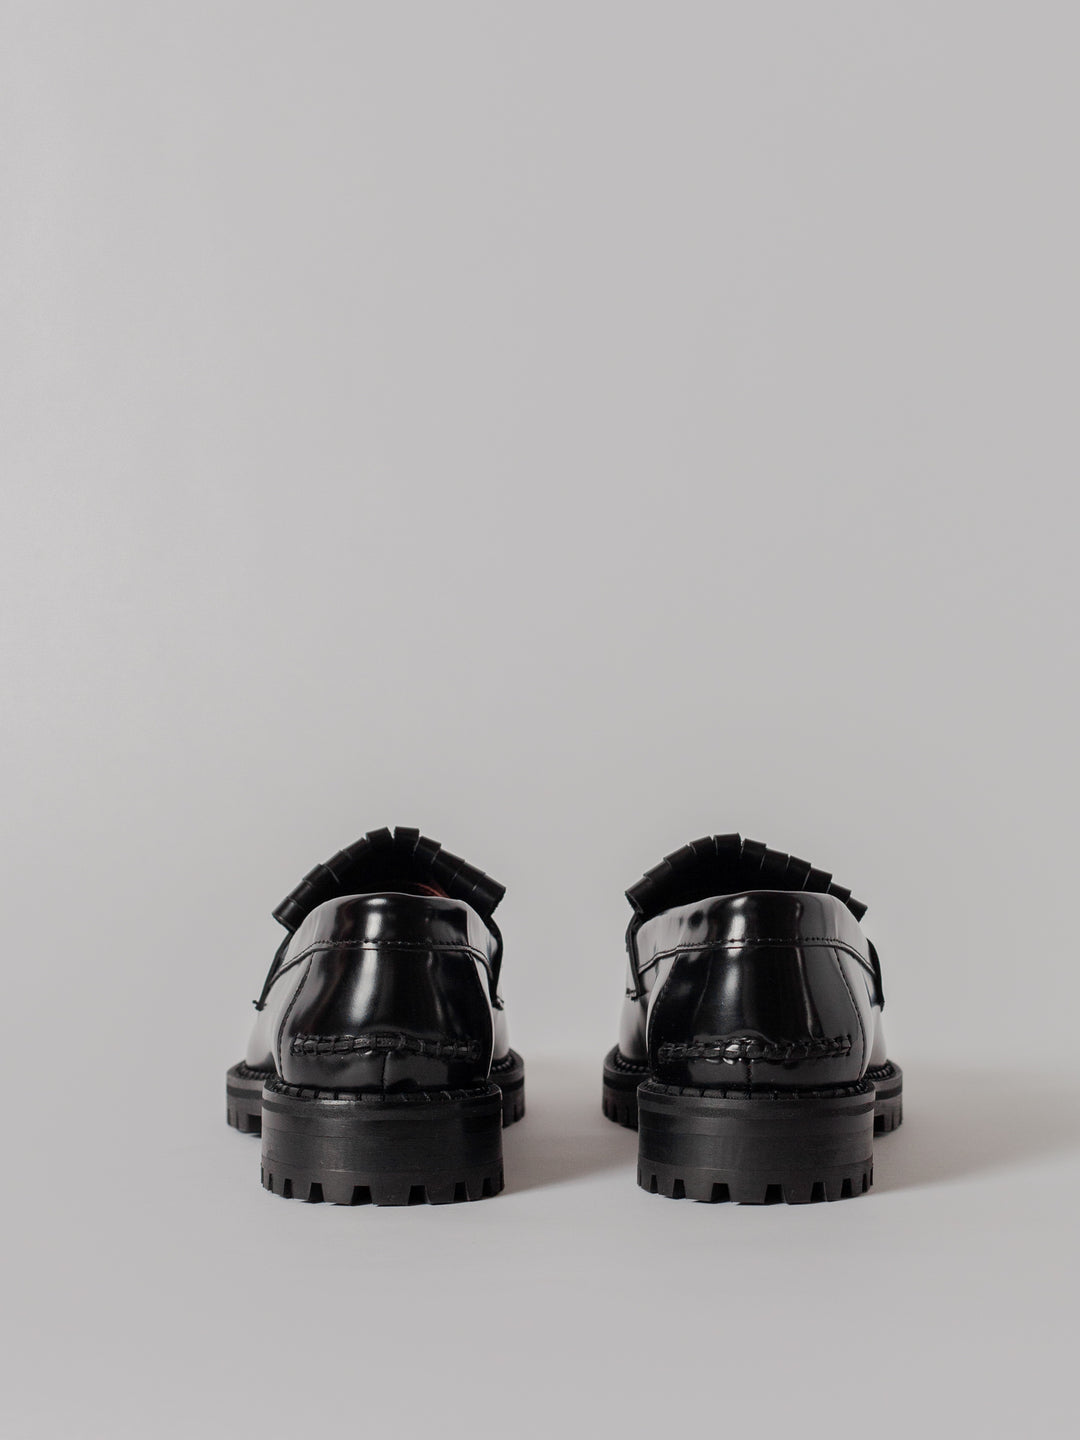 Blankens The Amal black loafer in leather with leather tassel in black. European leather sole in a rubber mix